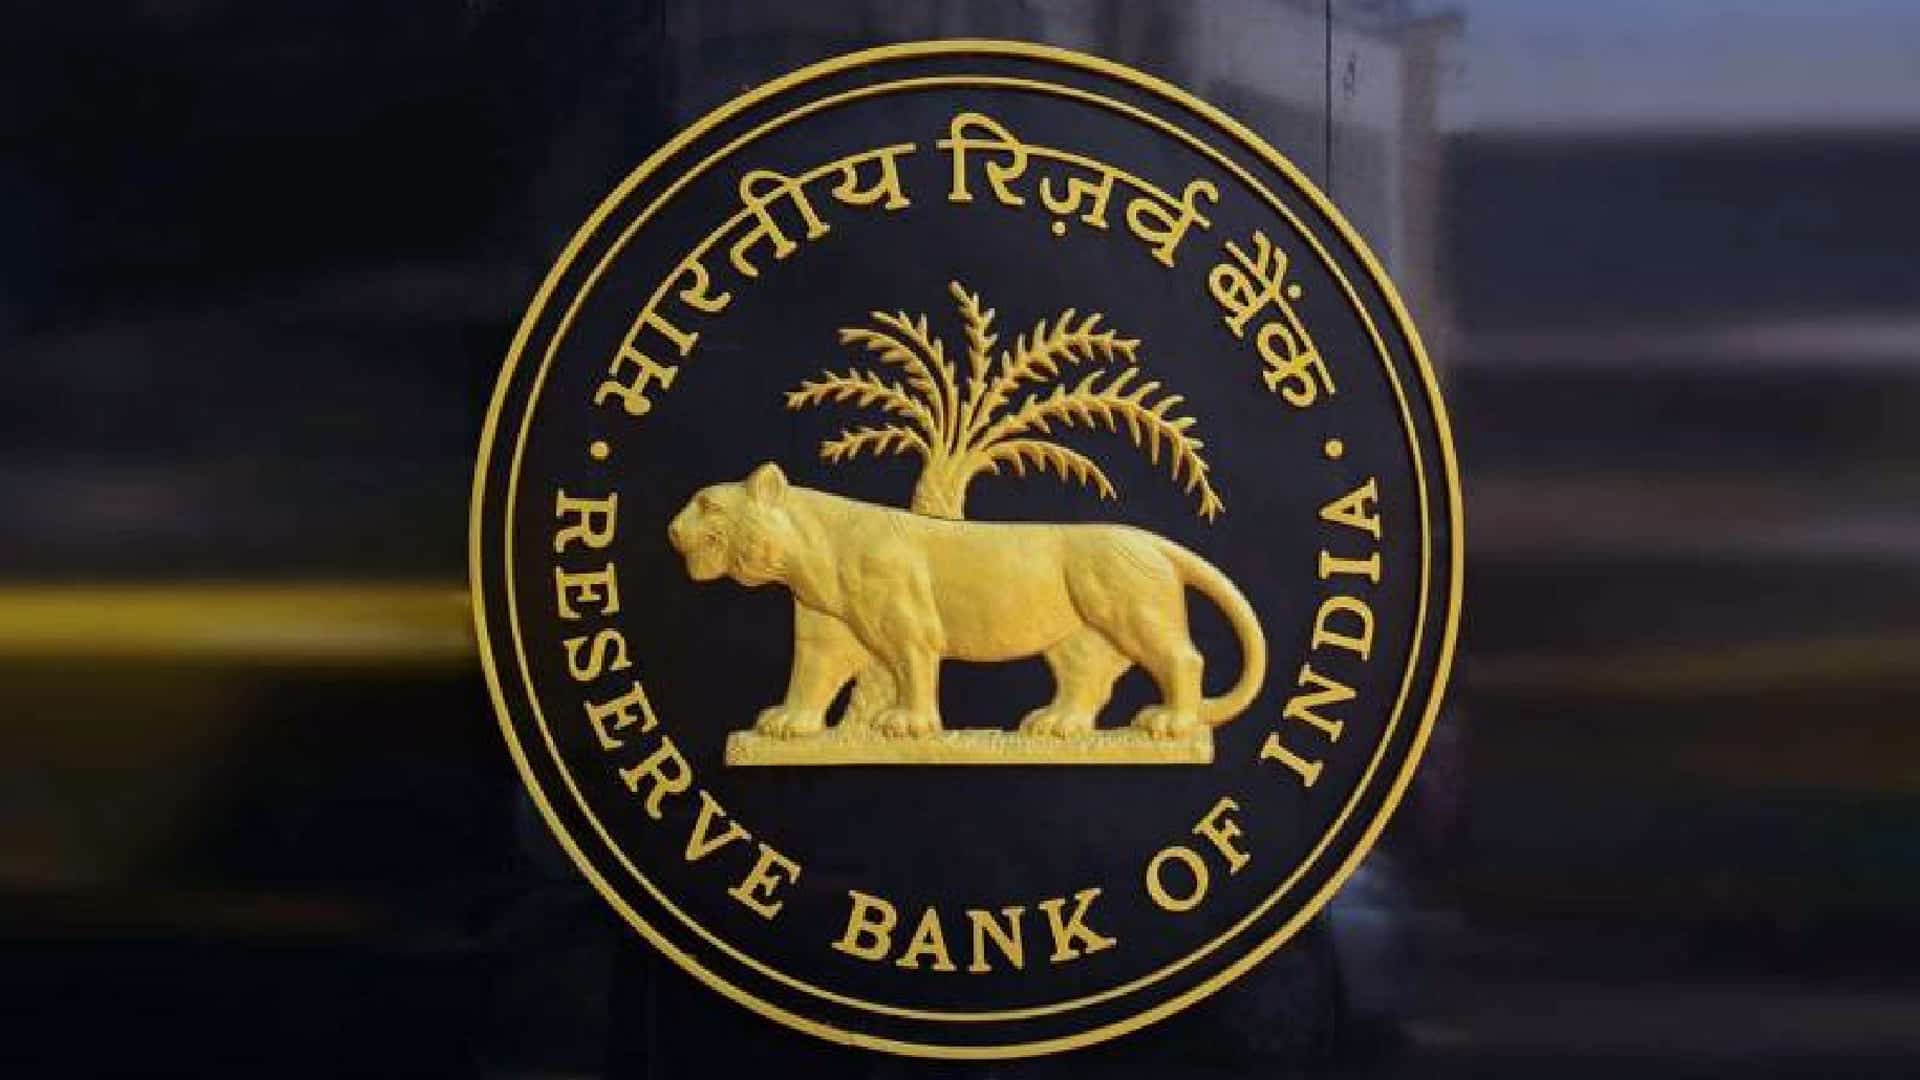 Most states agree to adopt RBI's fin literacy programme for schools: Official